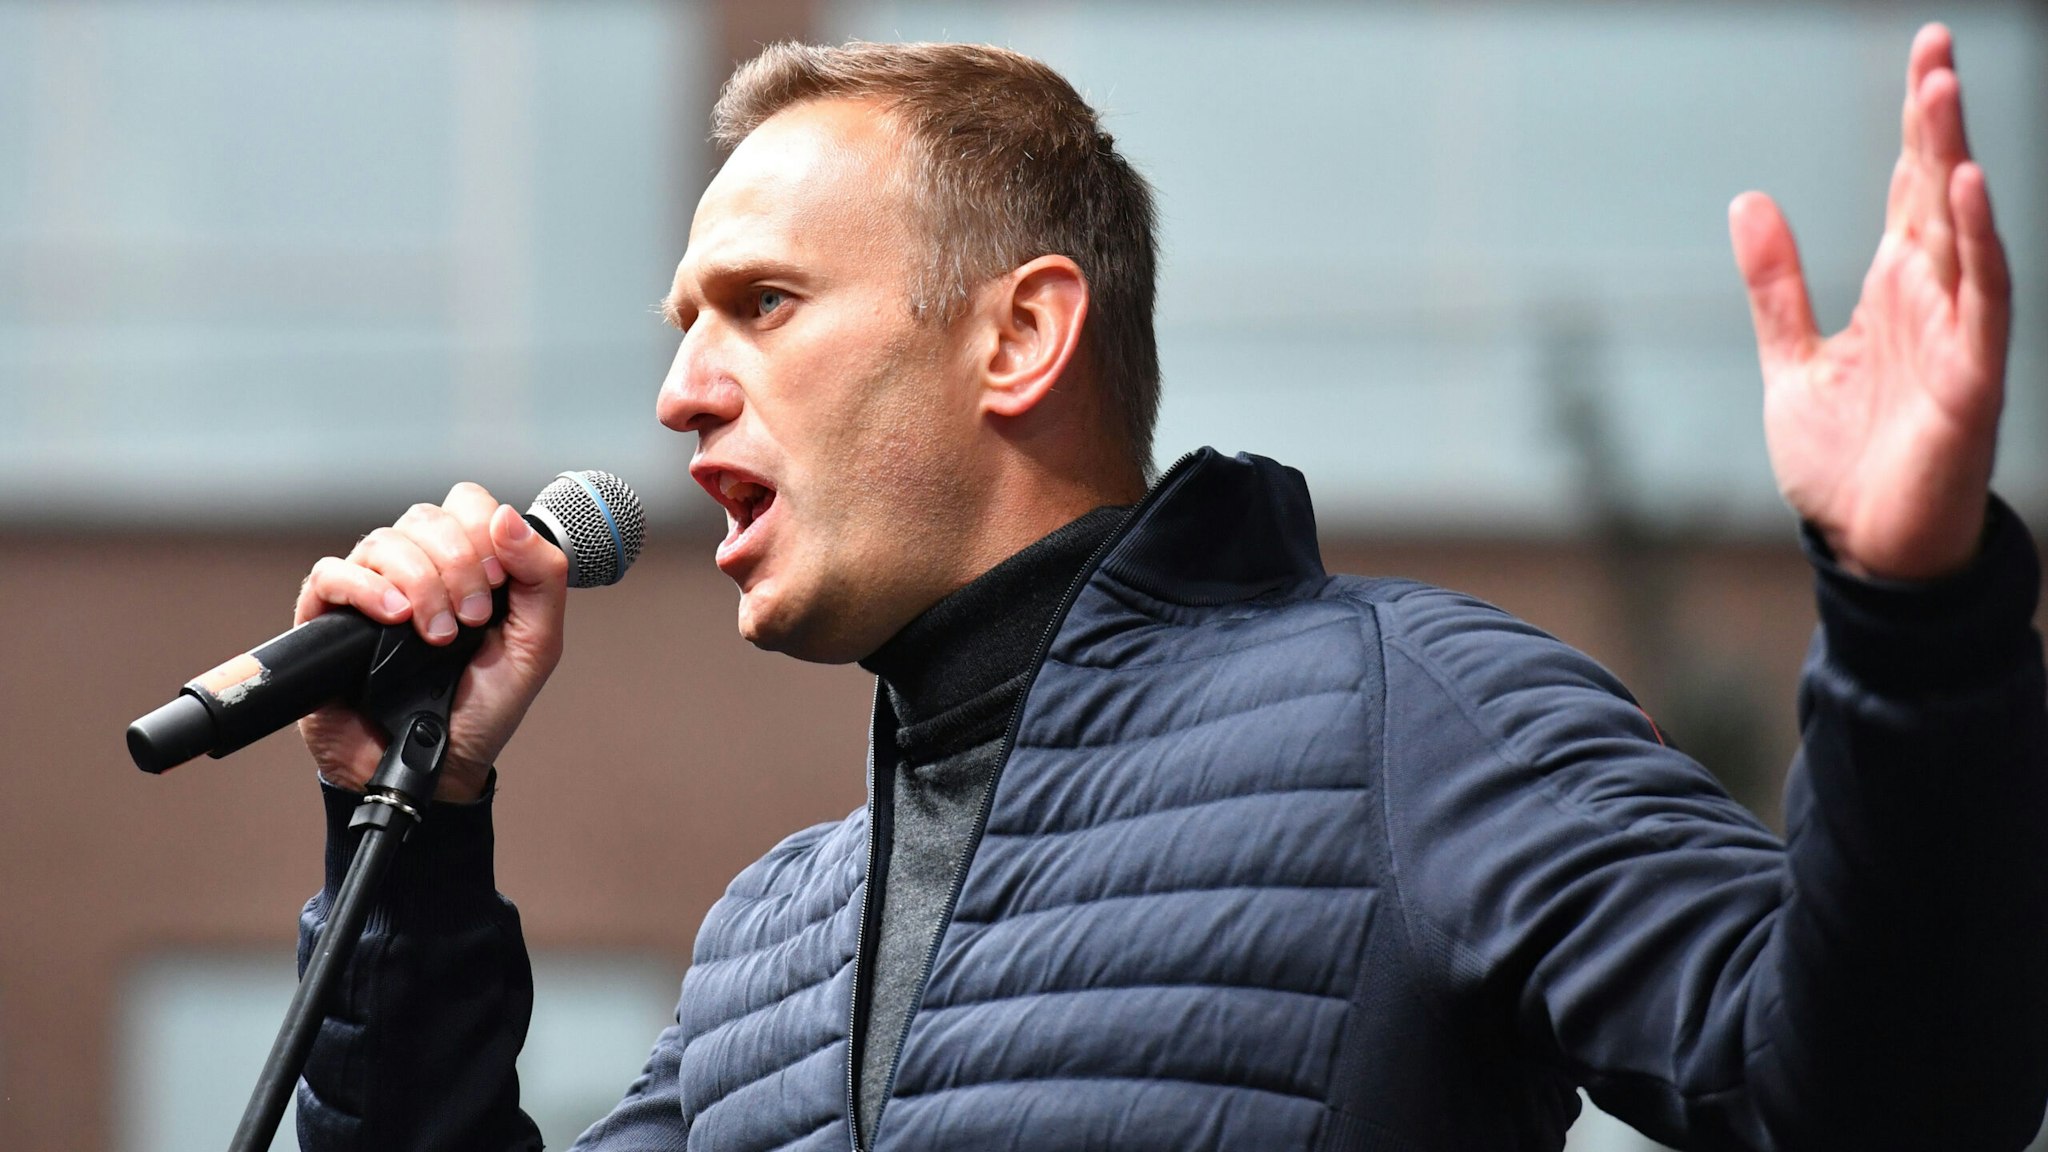 Russian opposition leader Alexei Navalny gestures as he delivers a speech during a demonstration in Moscow on September 29, 2019. - Thousands gathered in Moscow for a demonstration demanding the release of the opposition protesters prosecuted in recent months. Police estimated a turnout of 20,000 people at the Sakharov Avenue in central Moscow about half an hour after the start of the protest, which was authorised. The demonstrators chanted "let them go" and brandished placards demanding a halt to "repressions" of opposition protesters.